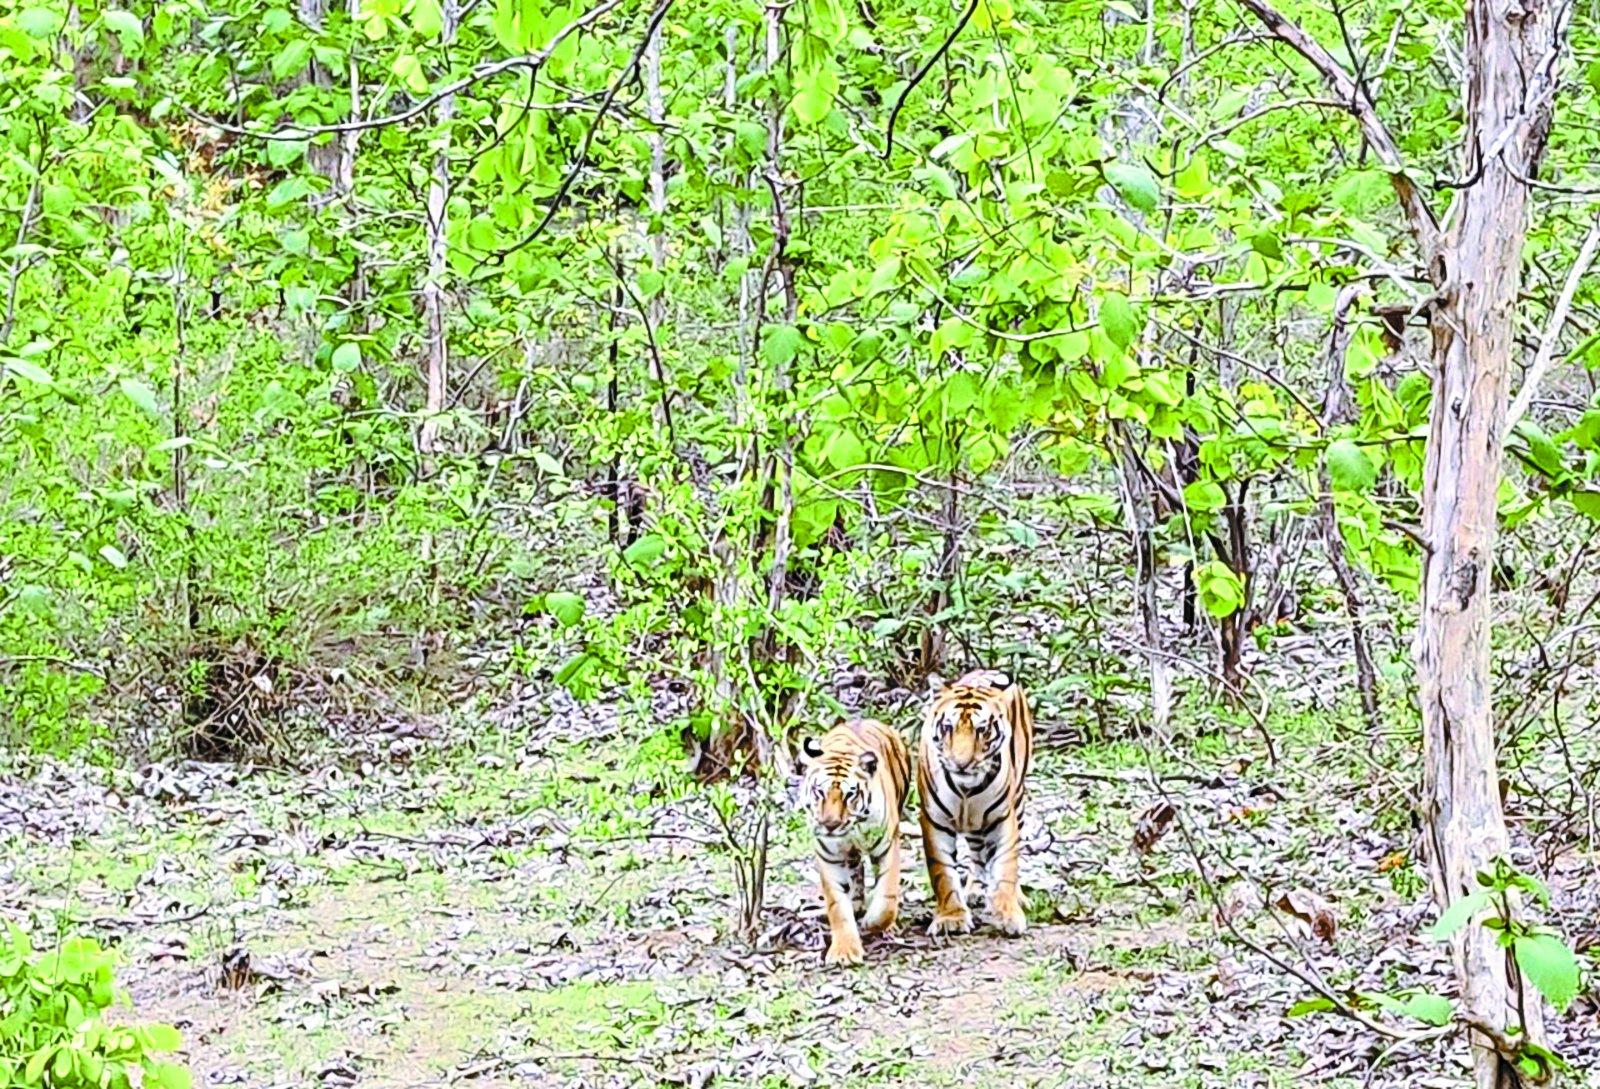 Tiger tigress trouble hazard Not checked up